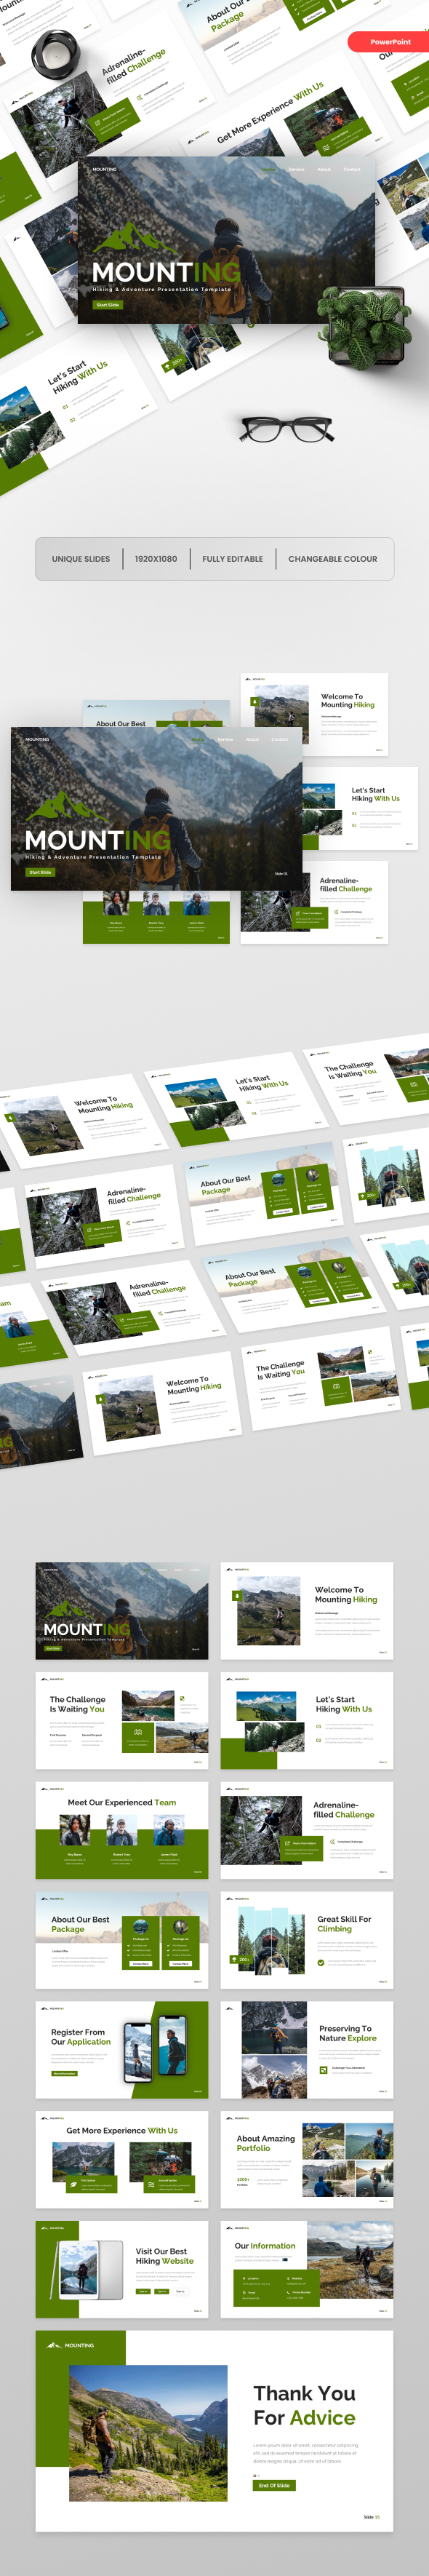 Mounting - Hiking & Adventure PowerPoint Template